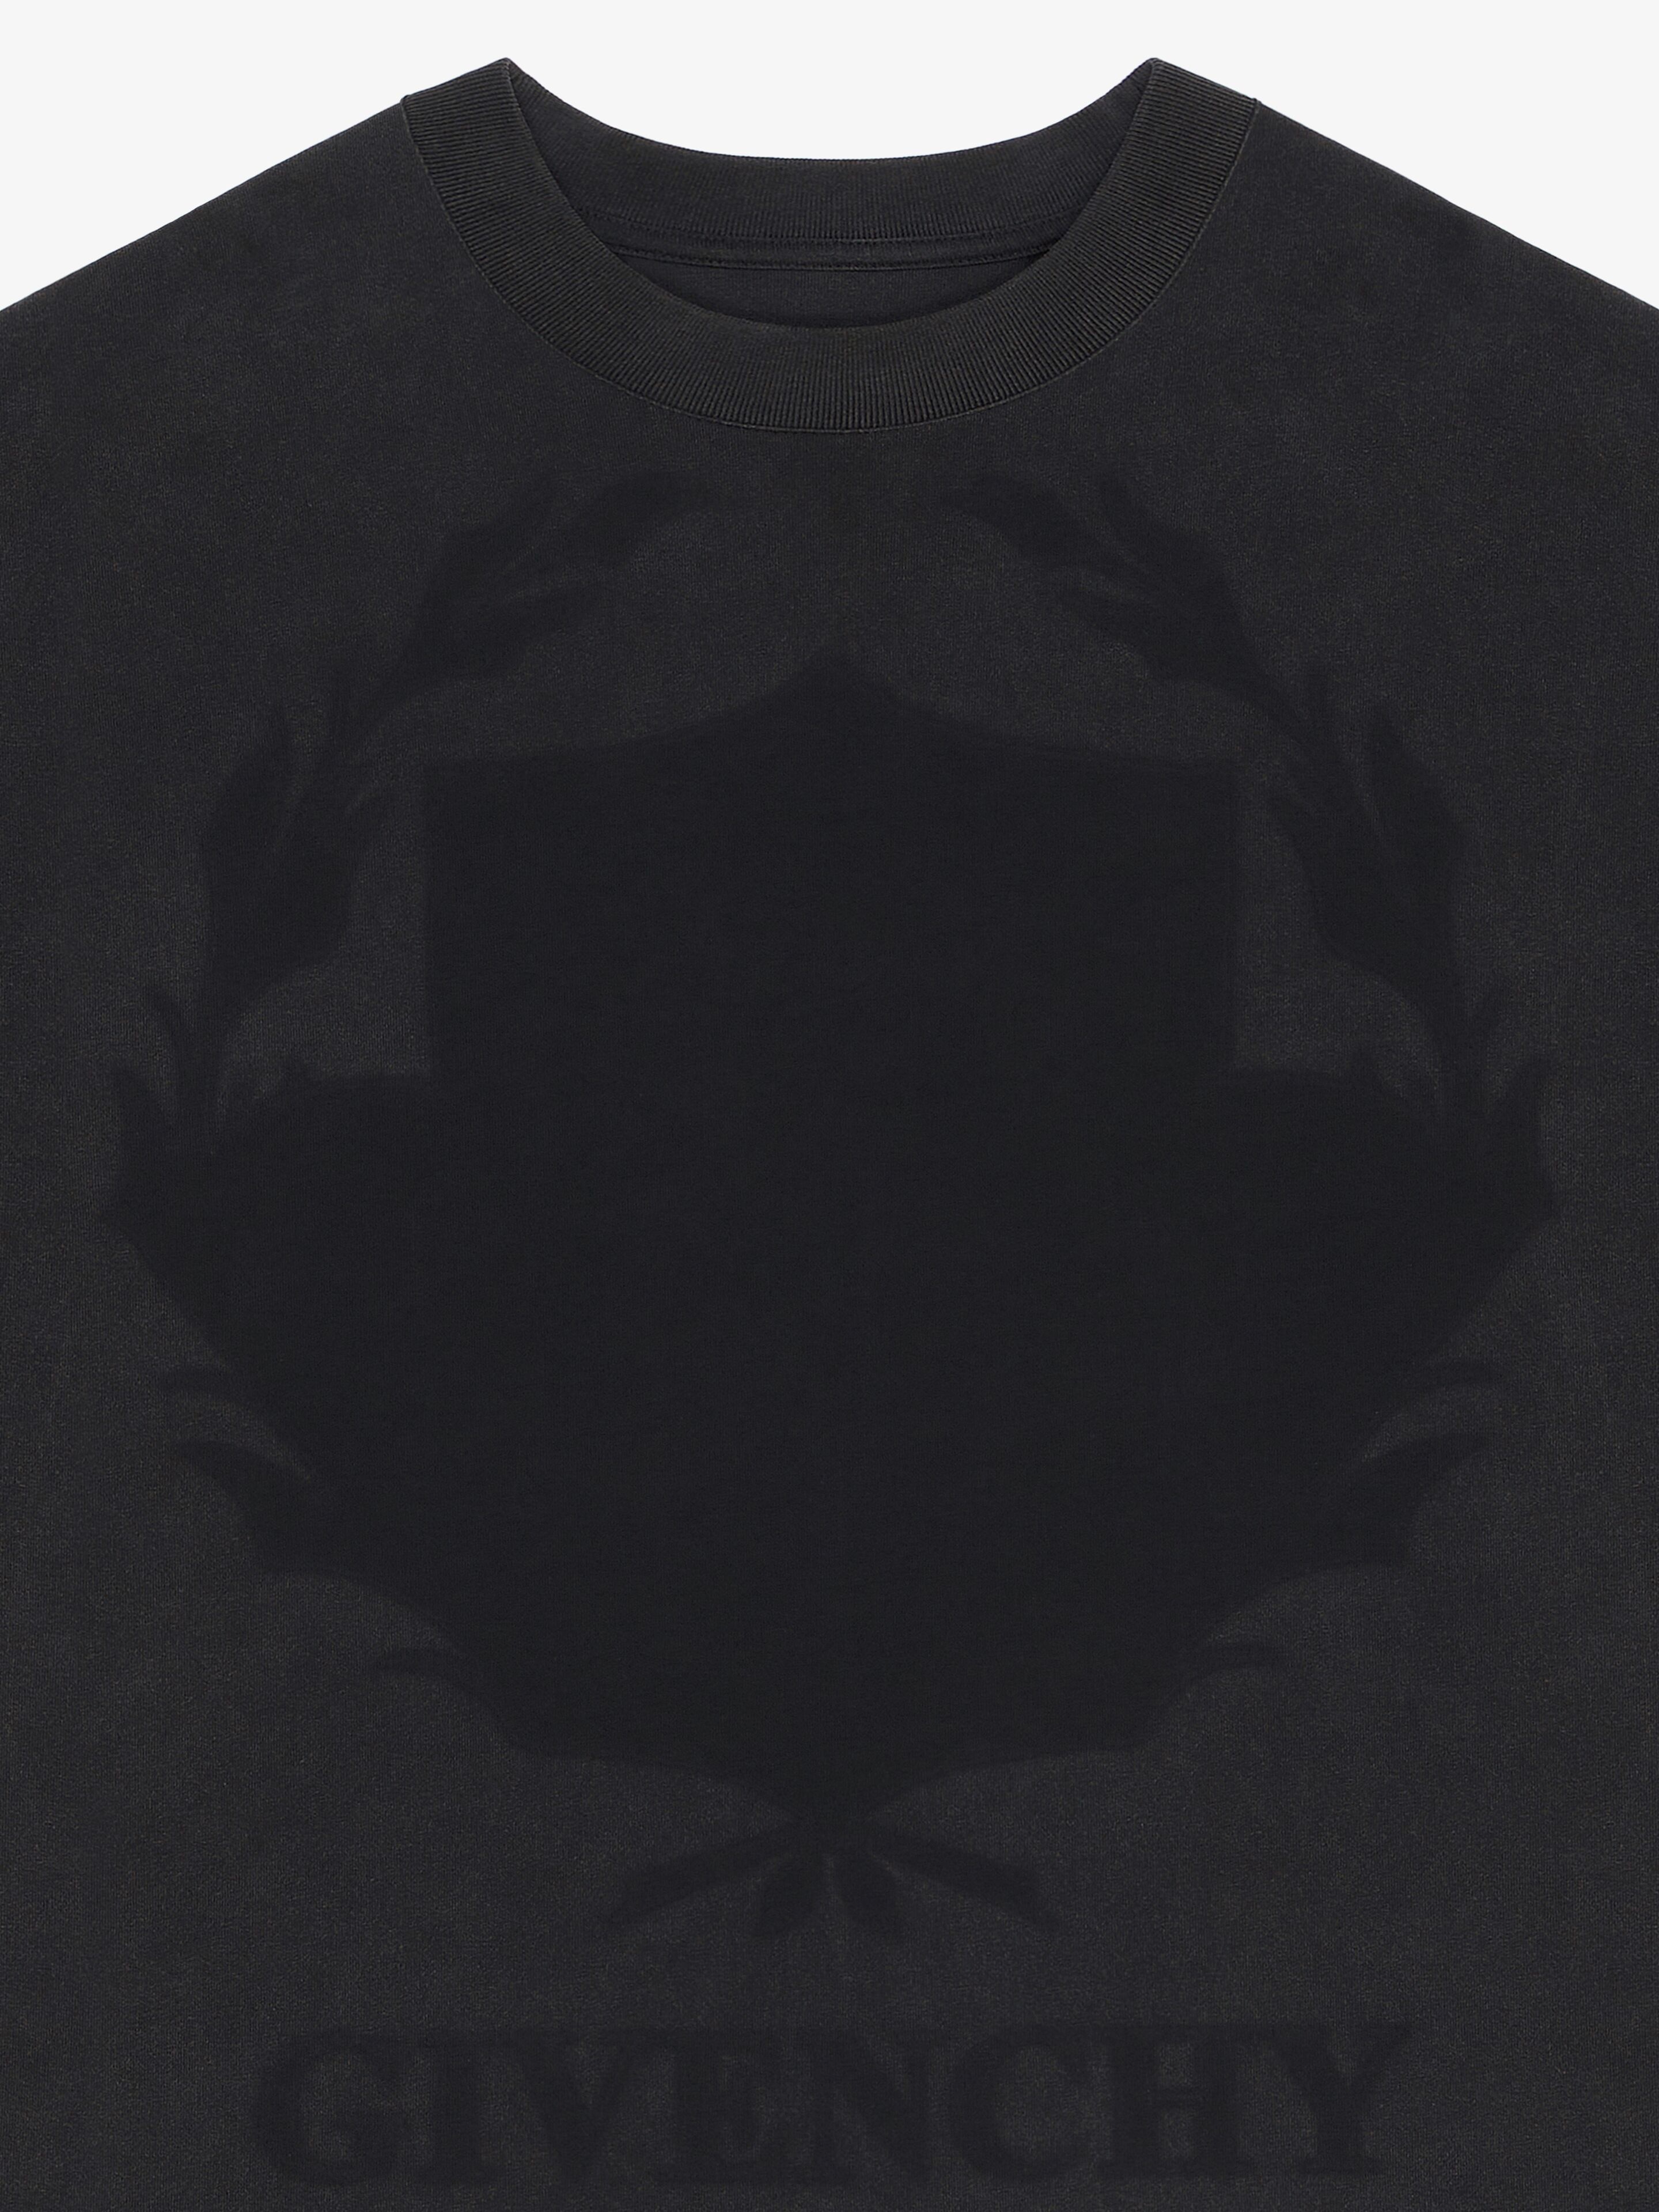 GIVENCHY SHADOW T-SHIRT IN COTTON - 5